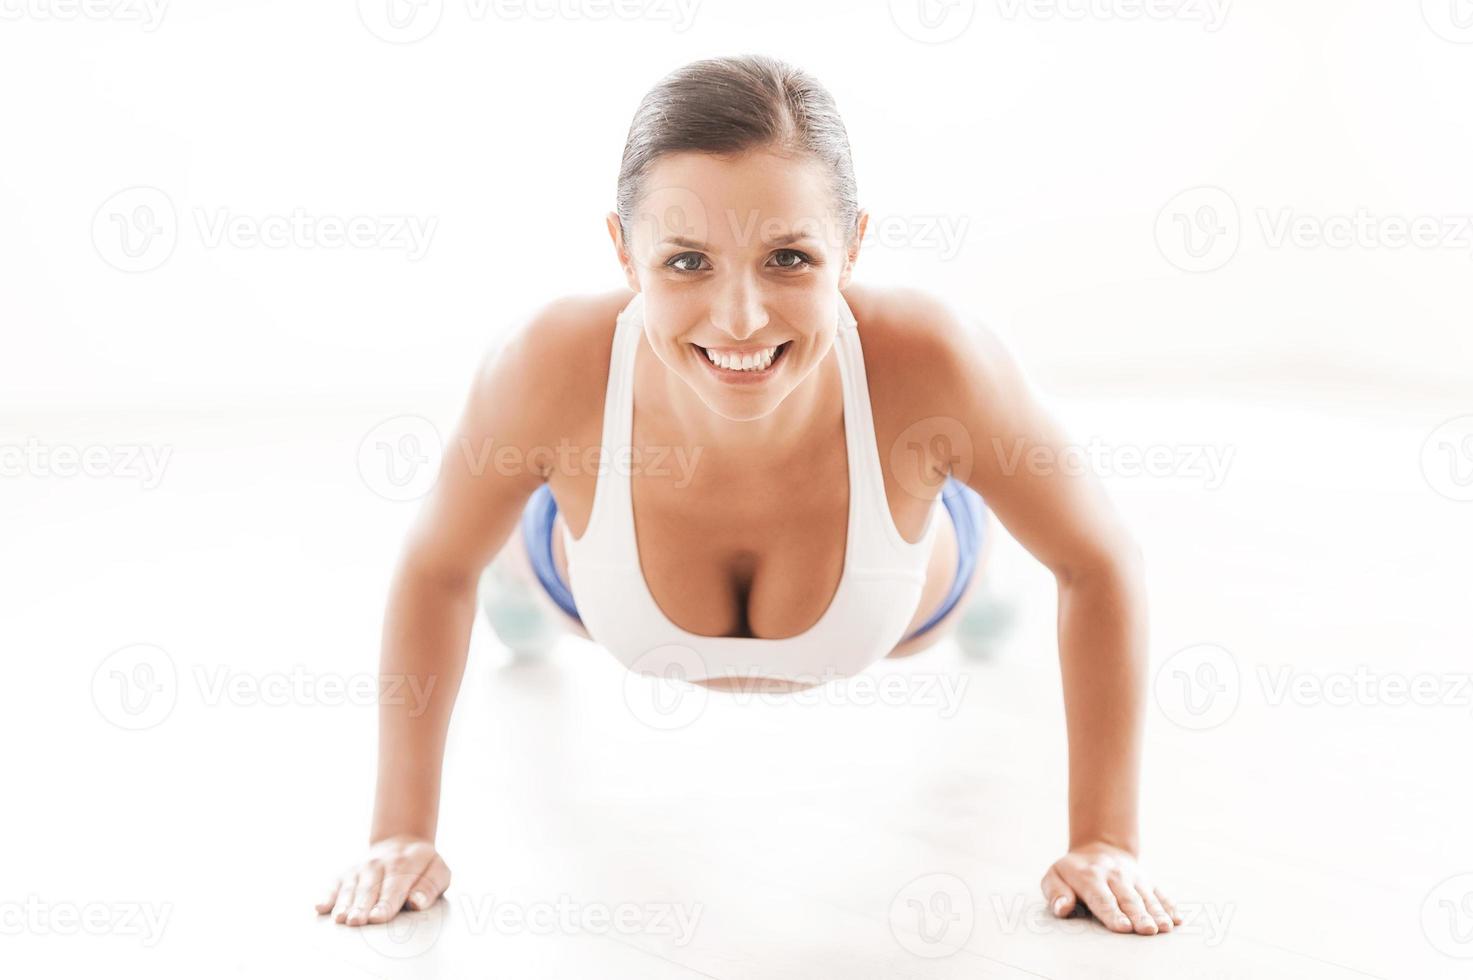 Woman exercising. Front view of beautiful young woman in sports clothing doing push-ups photo